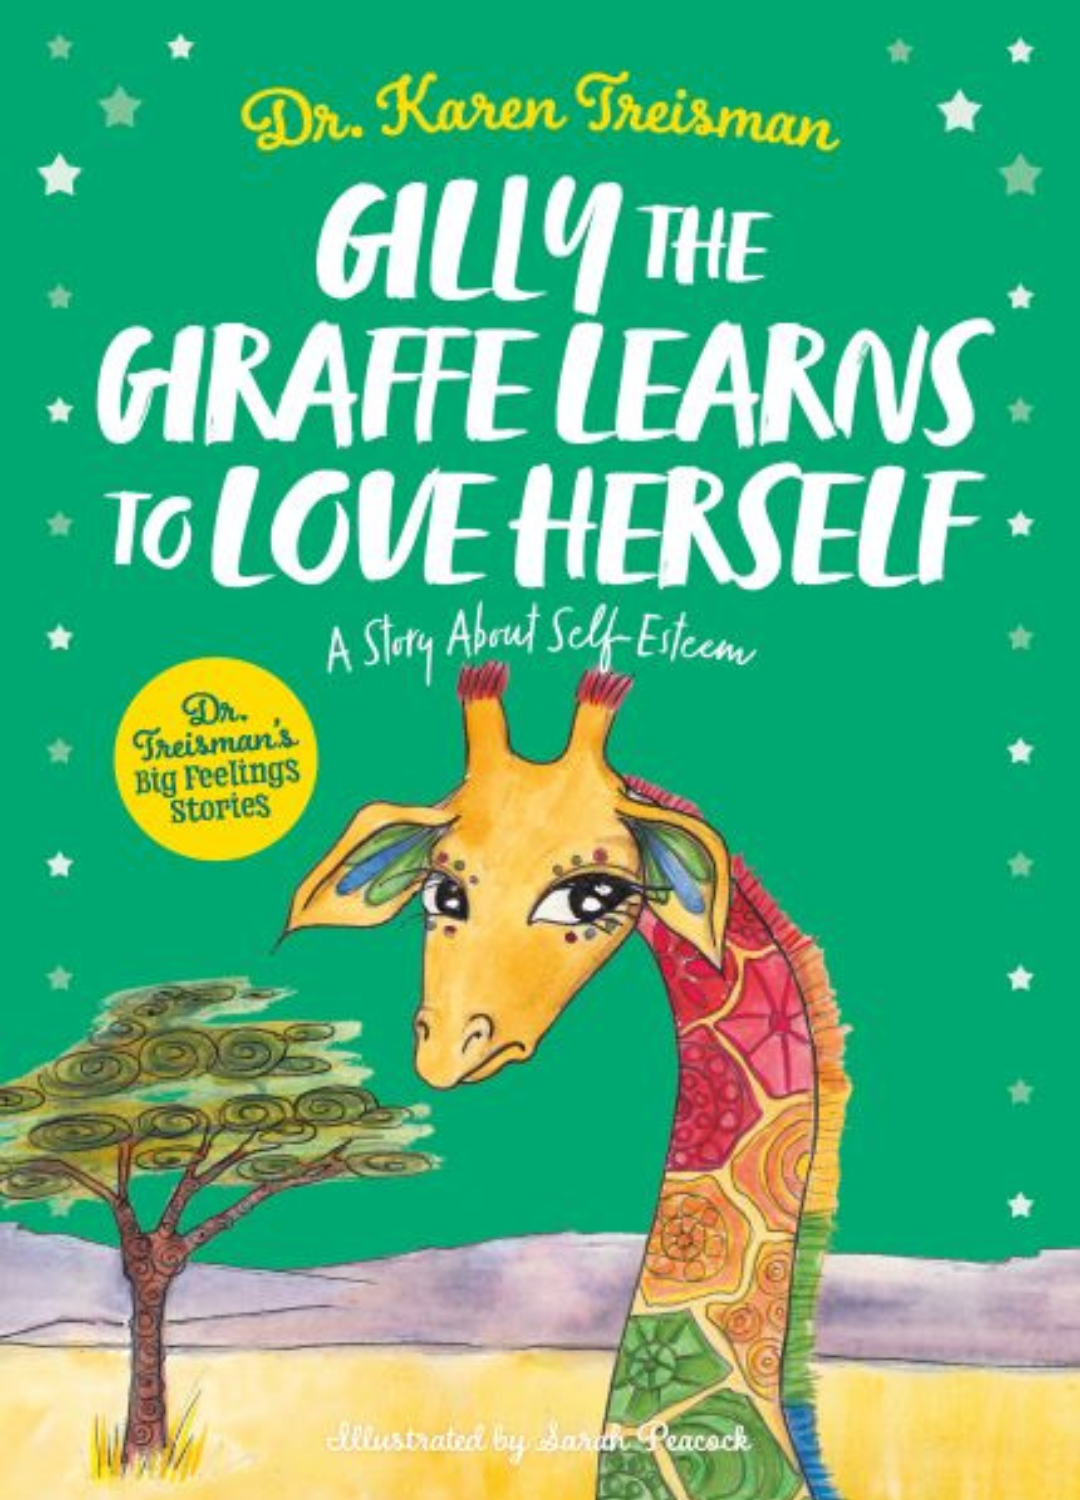 Front cover of Gilly the Giraffe Learns to Love Herself book